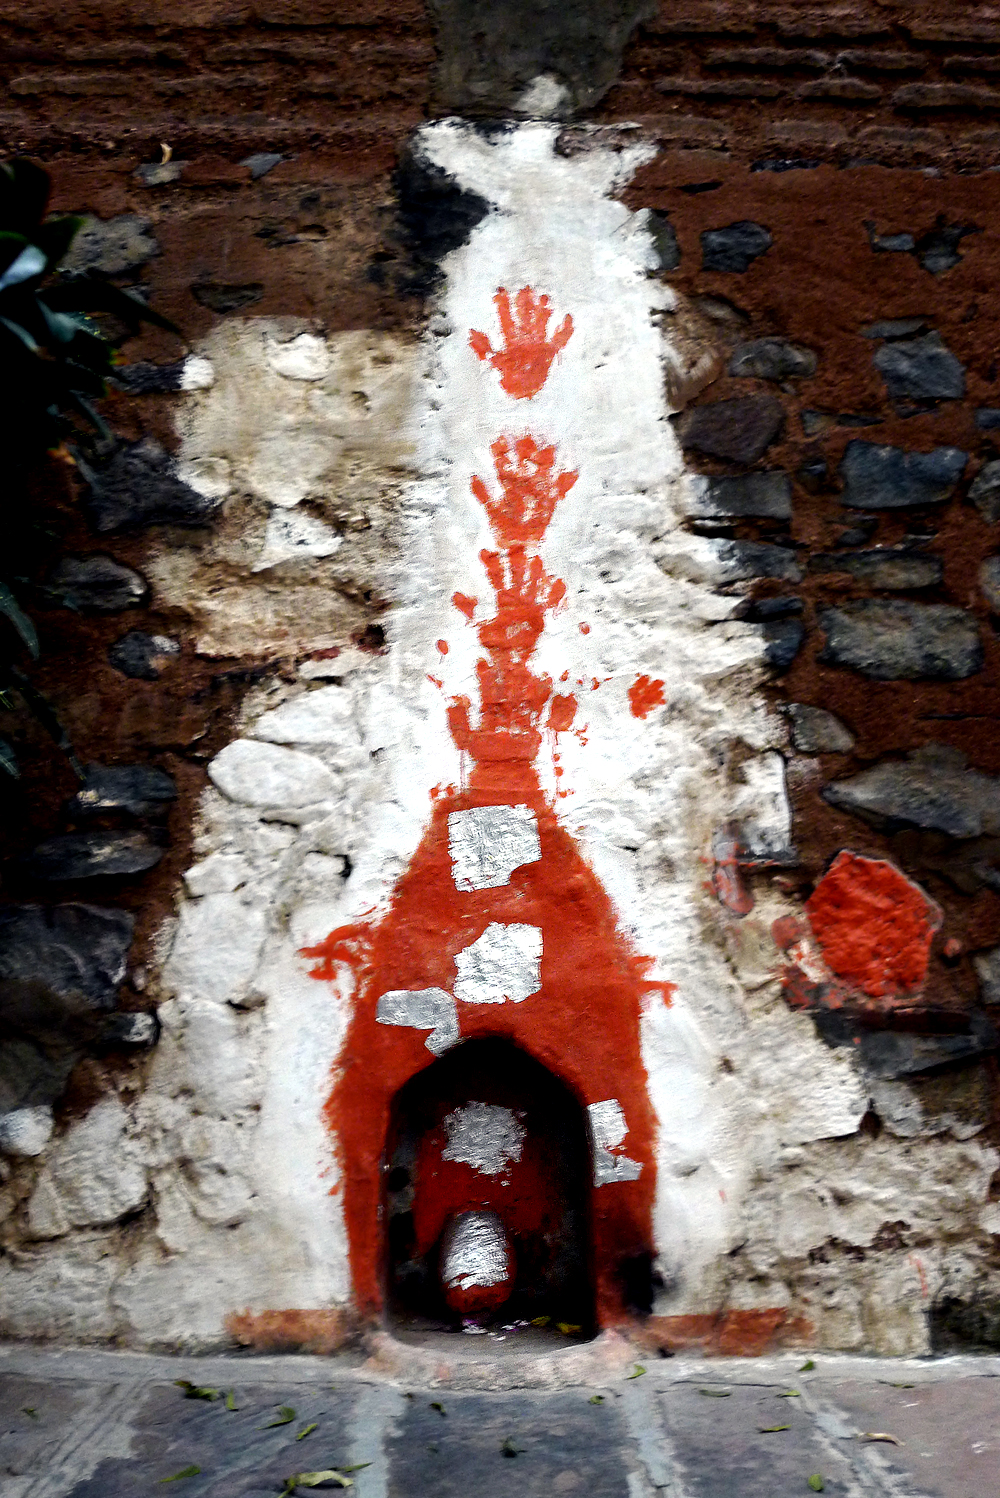 Hand prints in the tribal art of India